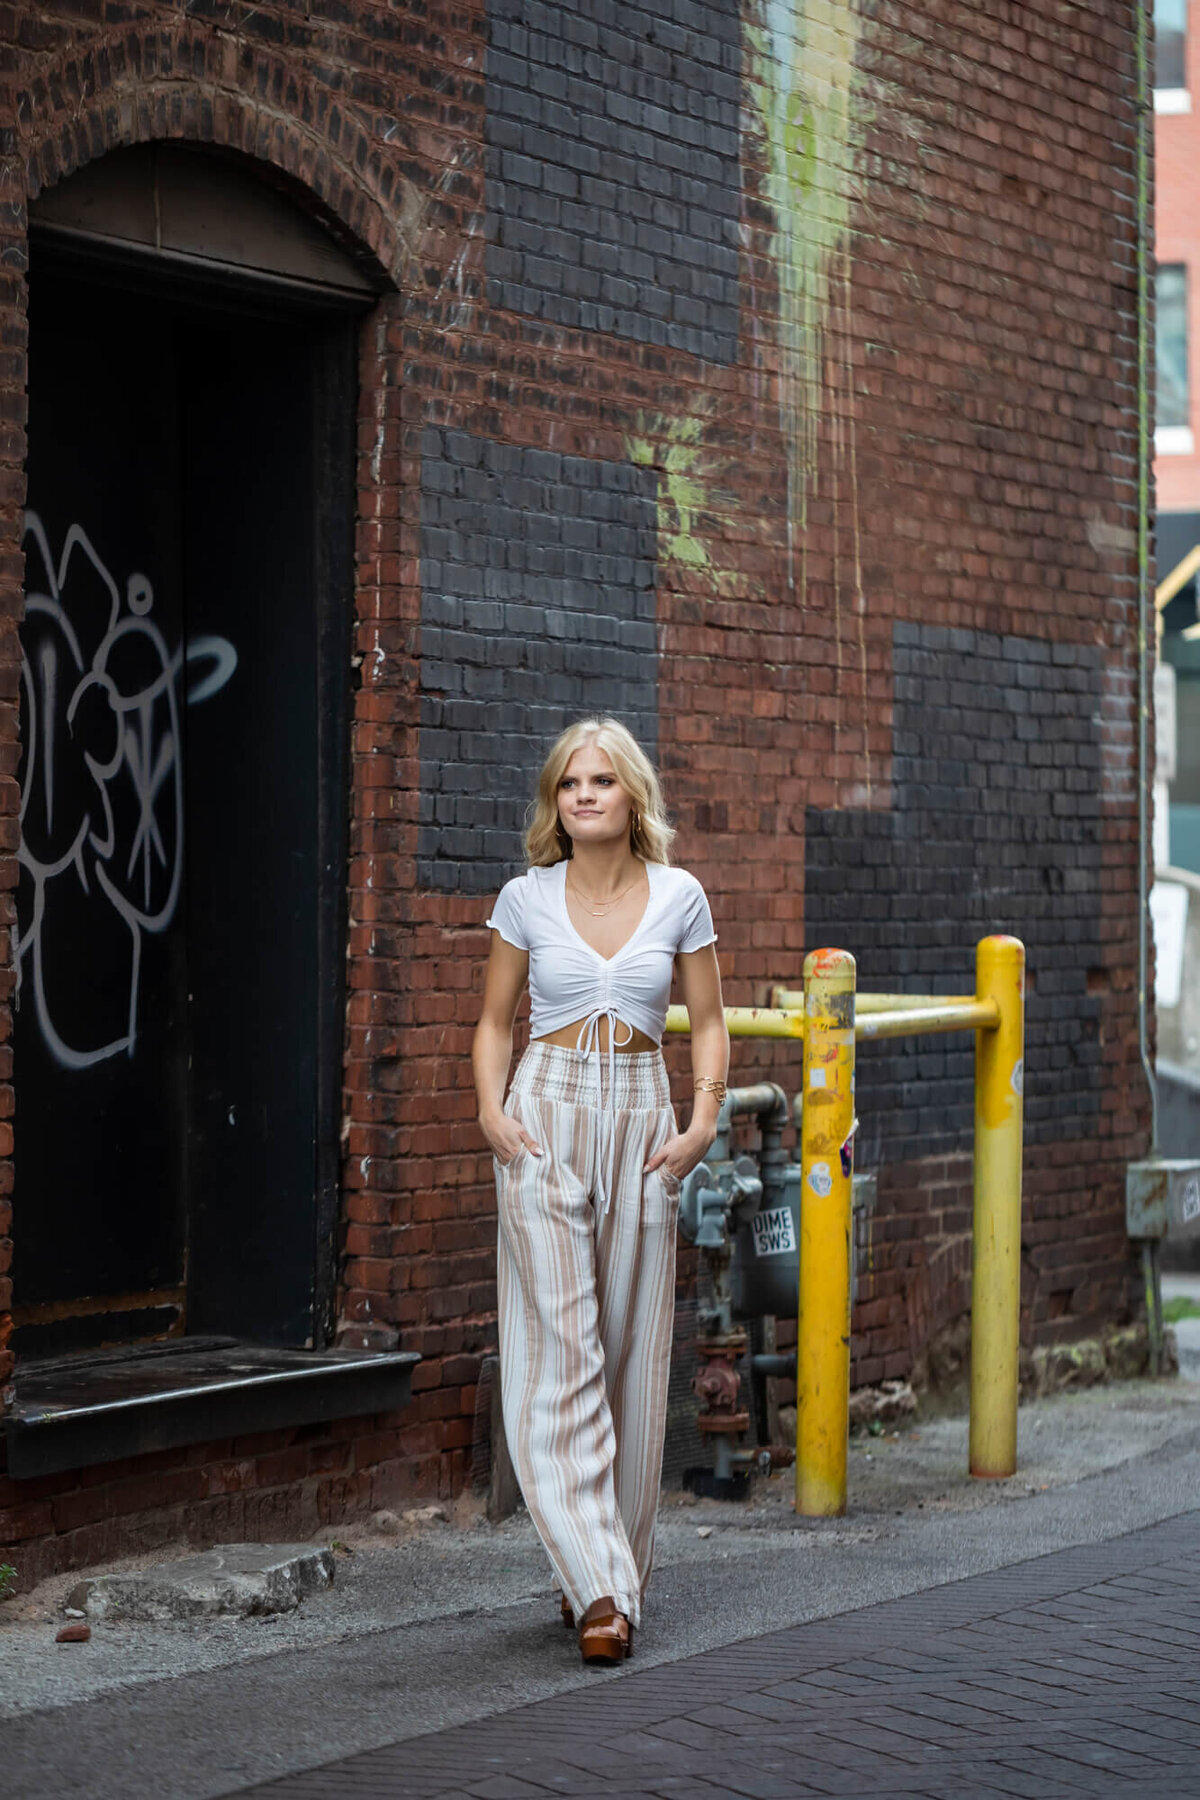 A casual senior portrait of a beautiful blonde high school senior walking in a downtown alleyway with graffiti. Captured by senior photographer Dynae Levingston.